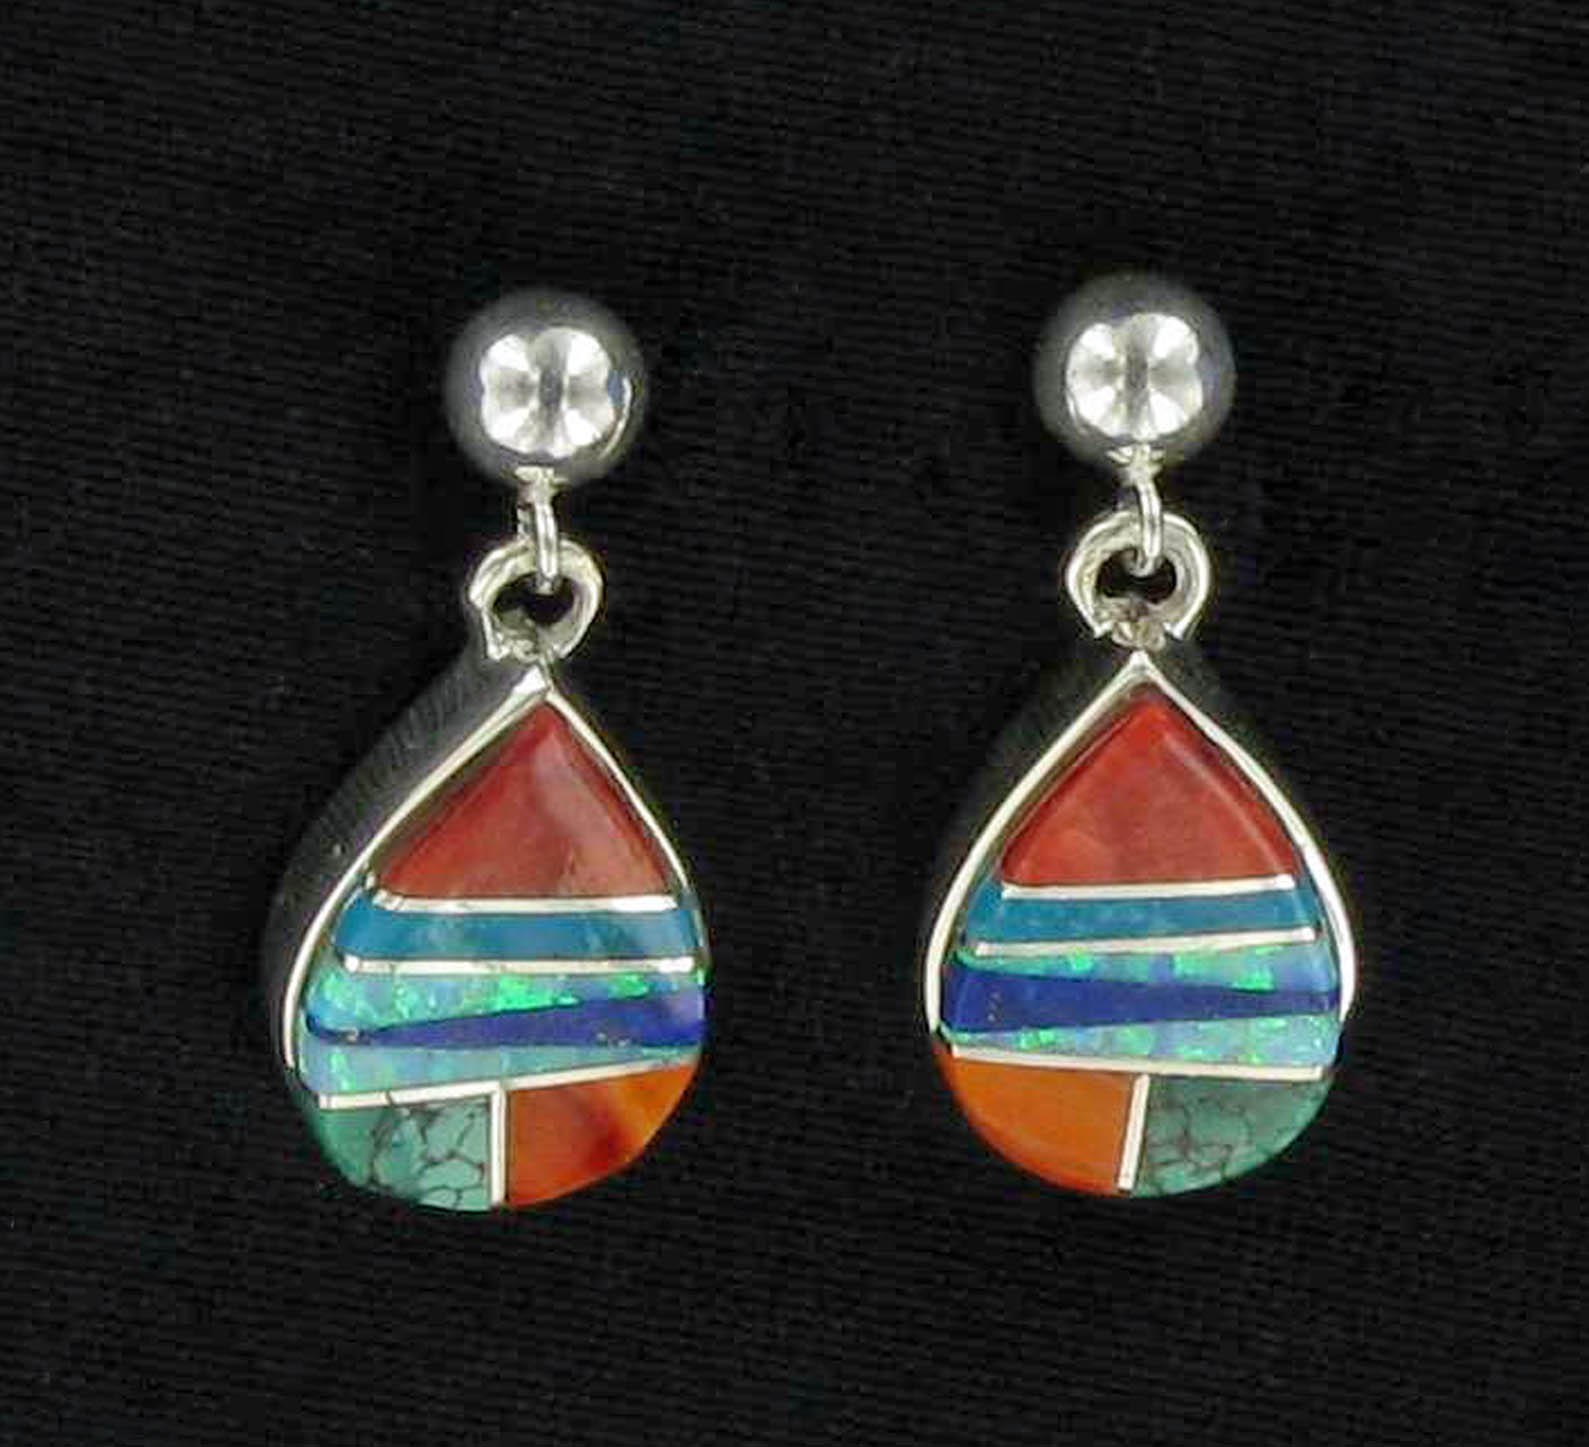 Details about   Premium Quality Navajo Handcrafted genuine stone inlay in sterling silver earrin 